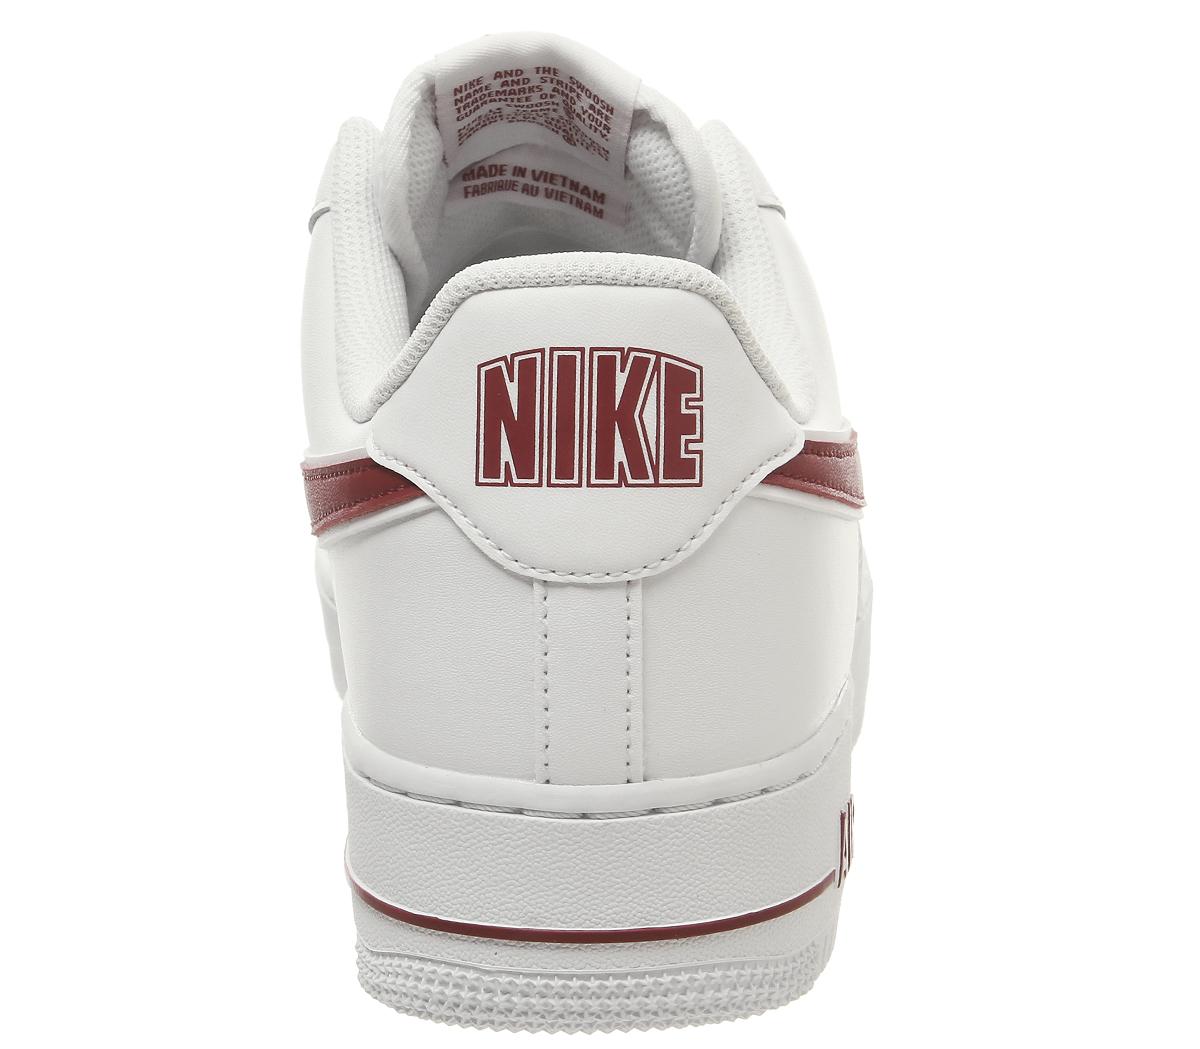 Nike Nike Air Force One Trainers White Gym Red - His trainers